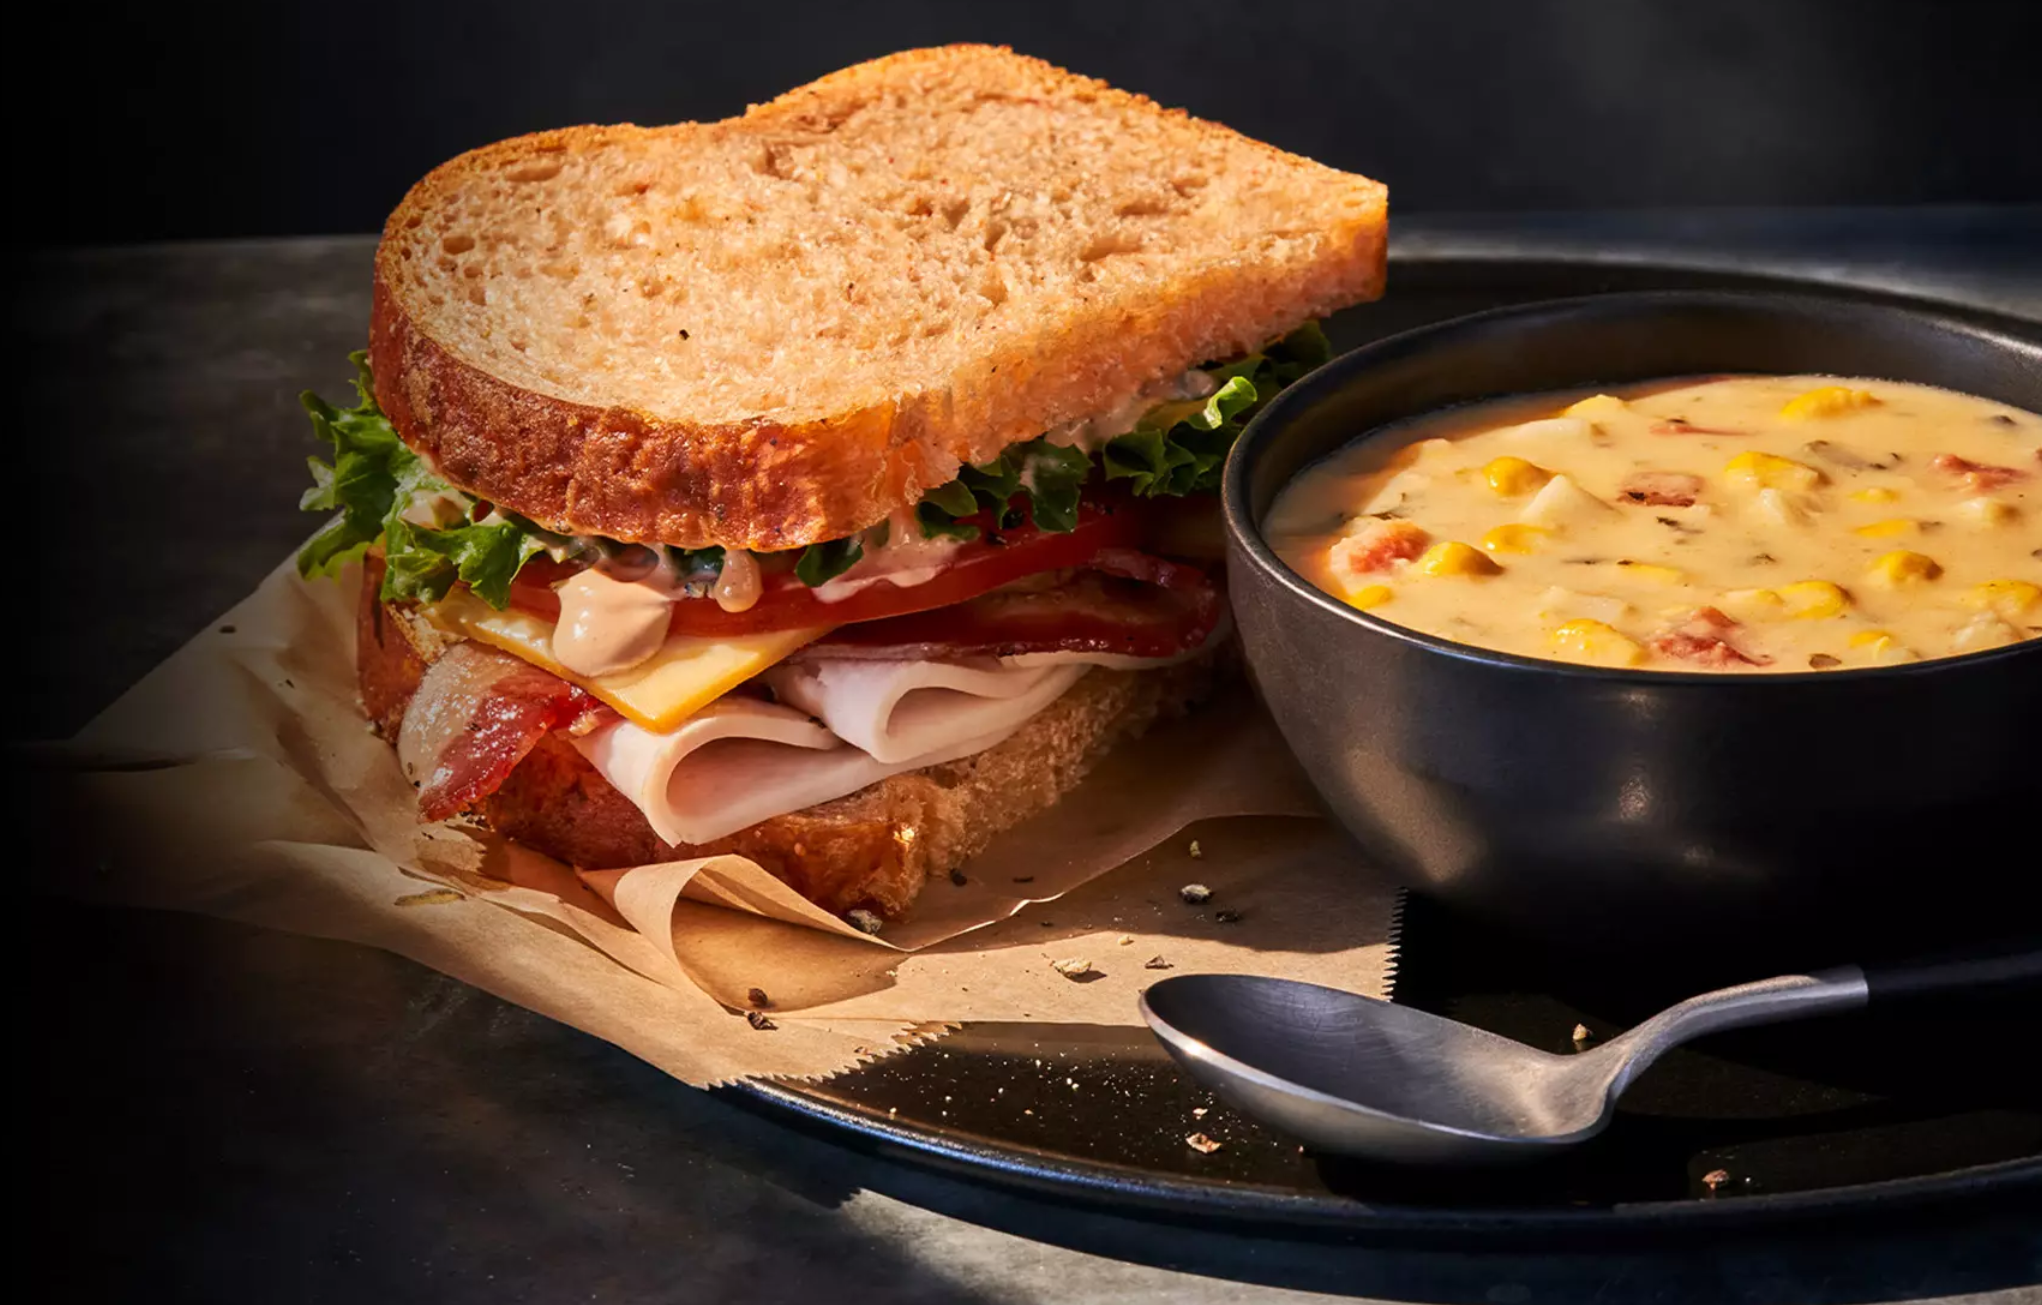 Dietitian's Tips for Eating Healthy at Panera